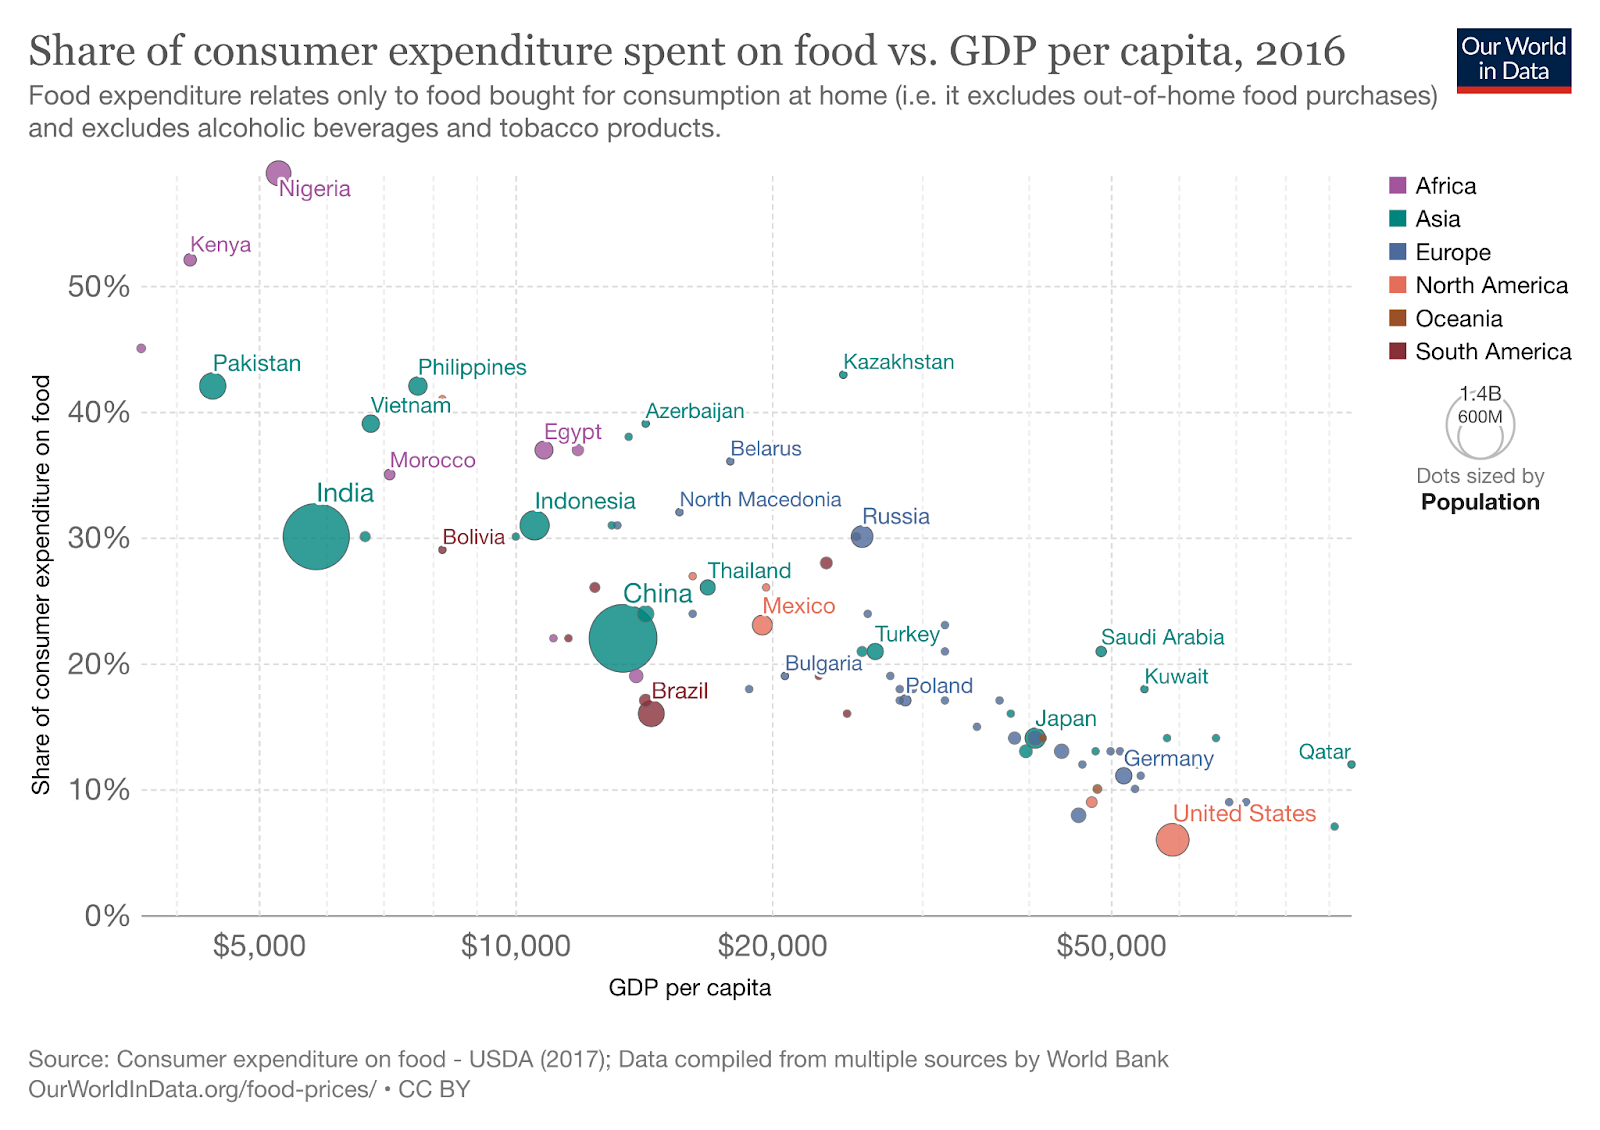 graphic of the consumer expenditure on food compared to per capita GDP